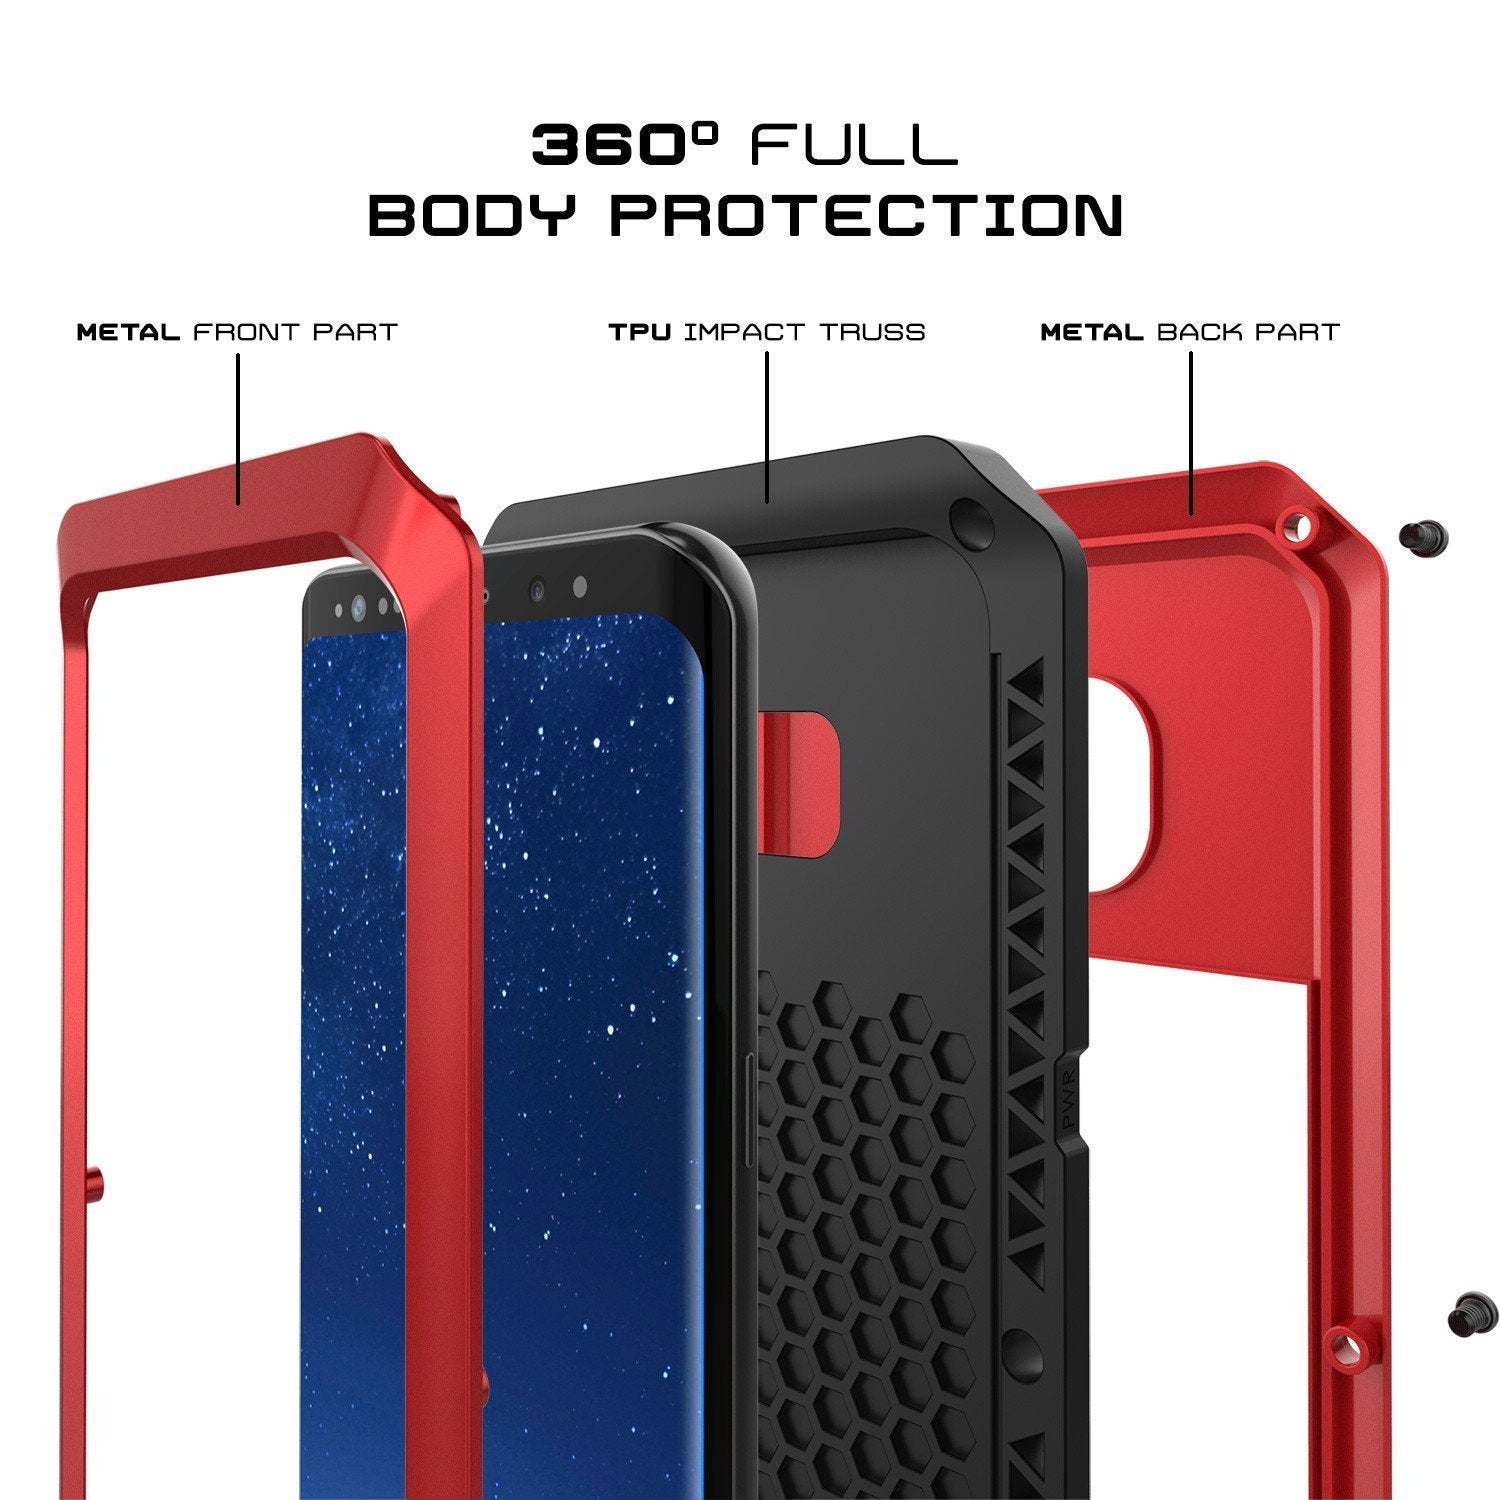 Galaxy Note 8  Case, Punkcase METALLIC Red Shockproof Slim Metal Cover Armor Case